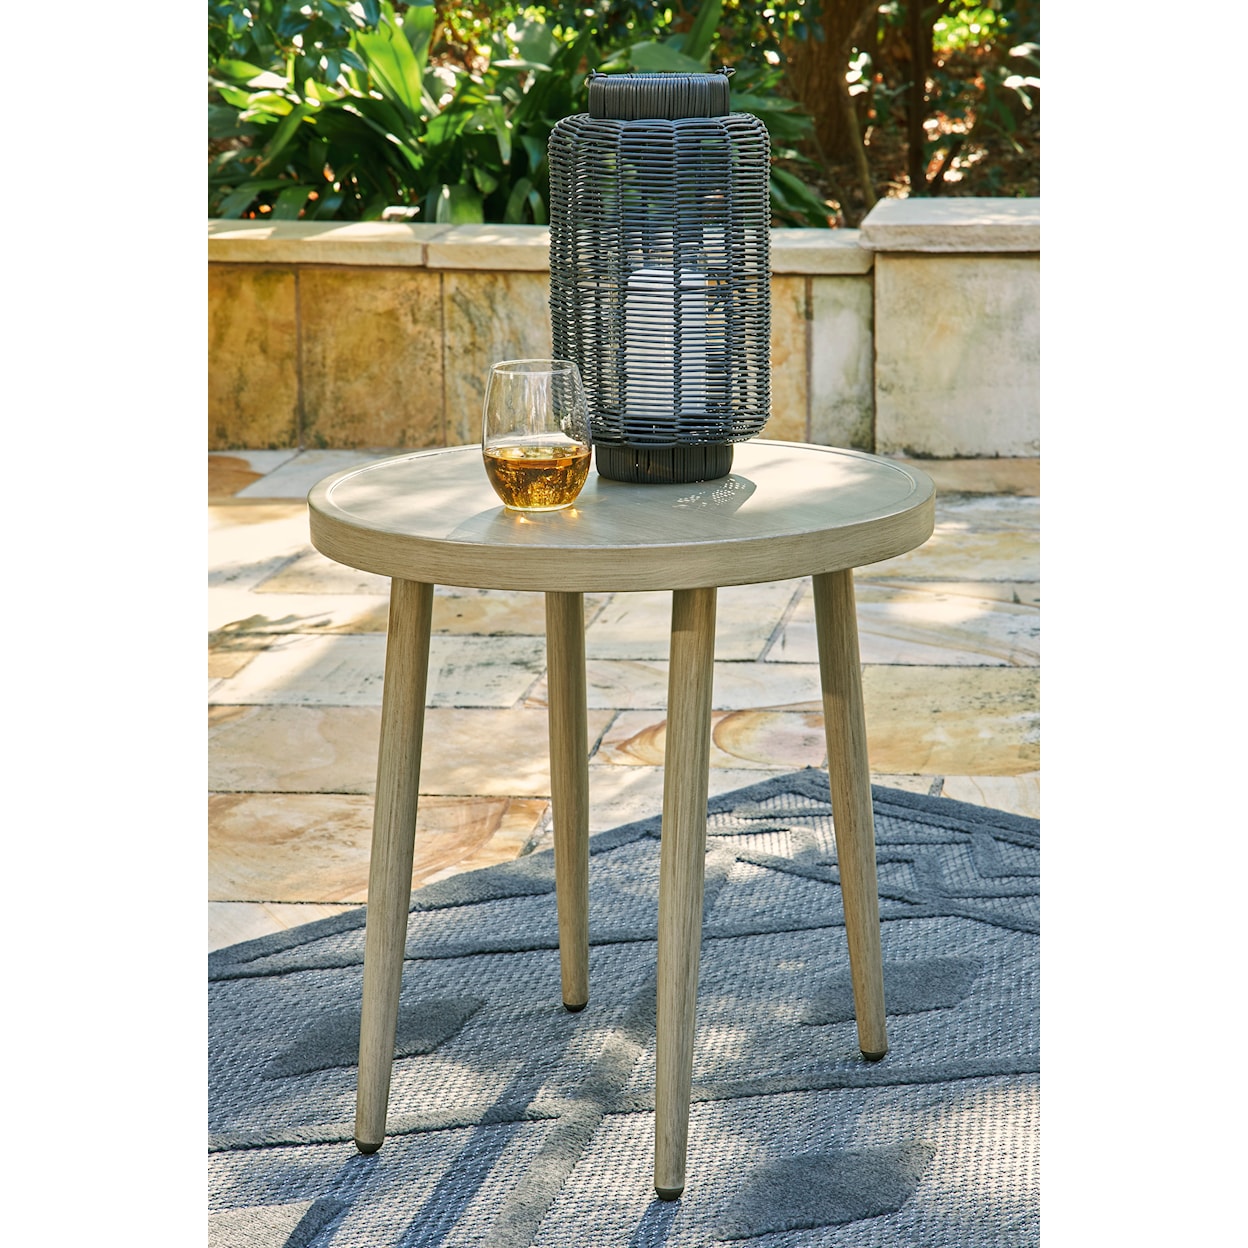 Signature Design by Ashley Swiss Valley Outdoor End Table